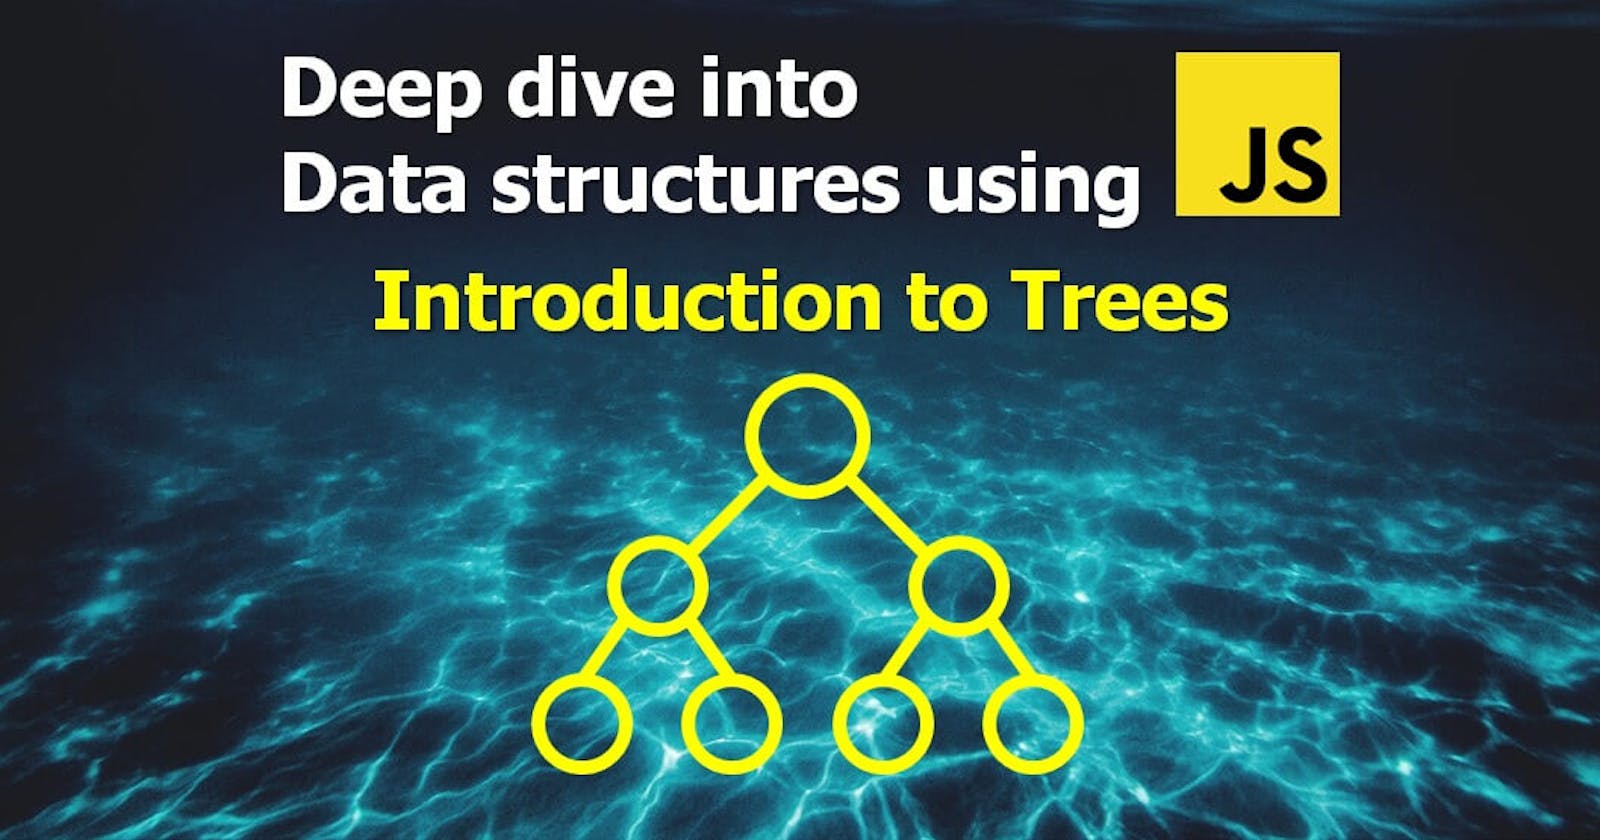 Deep Dive into Data structures using Javascript - Introduction to Trees